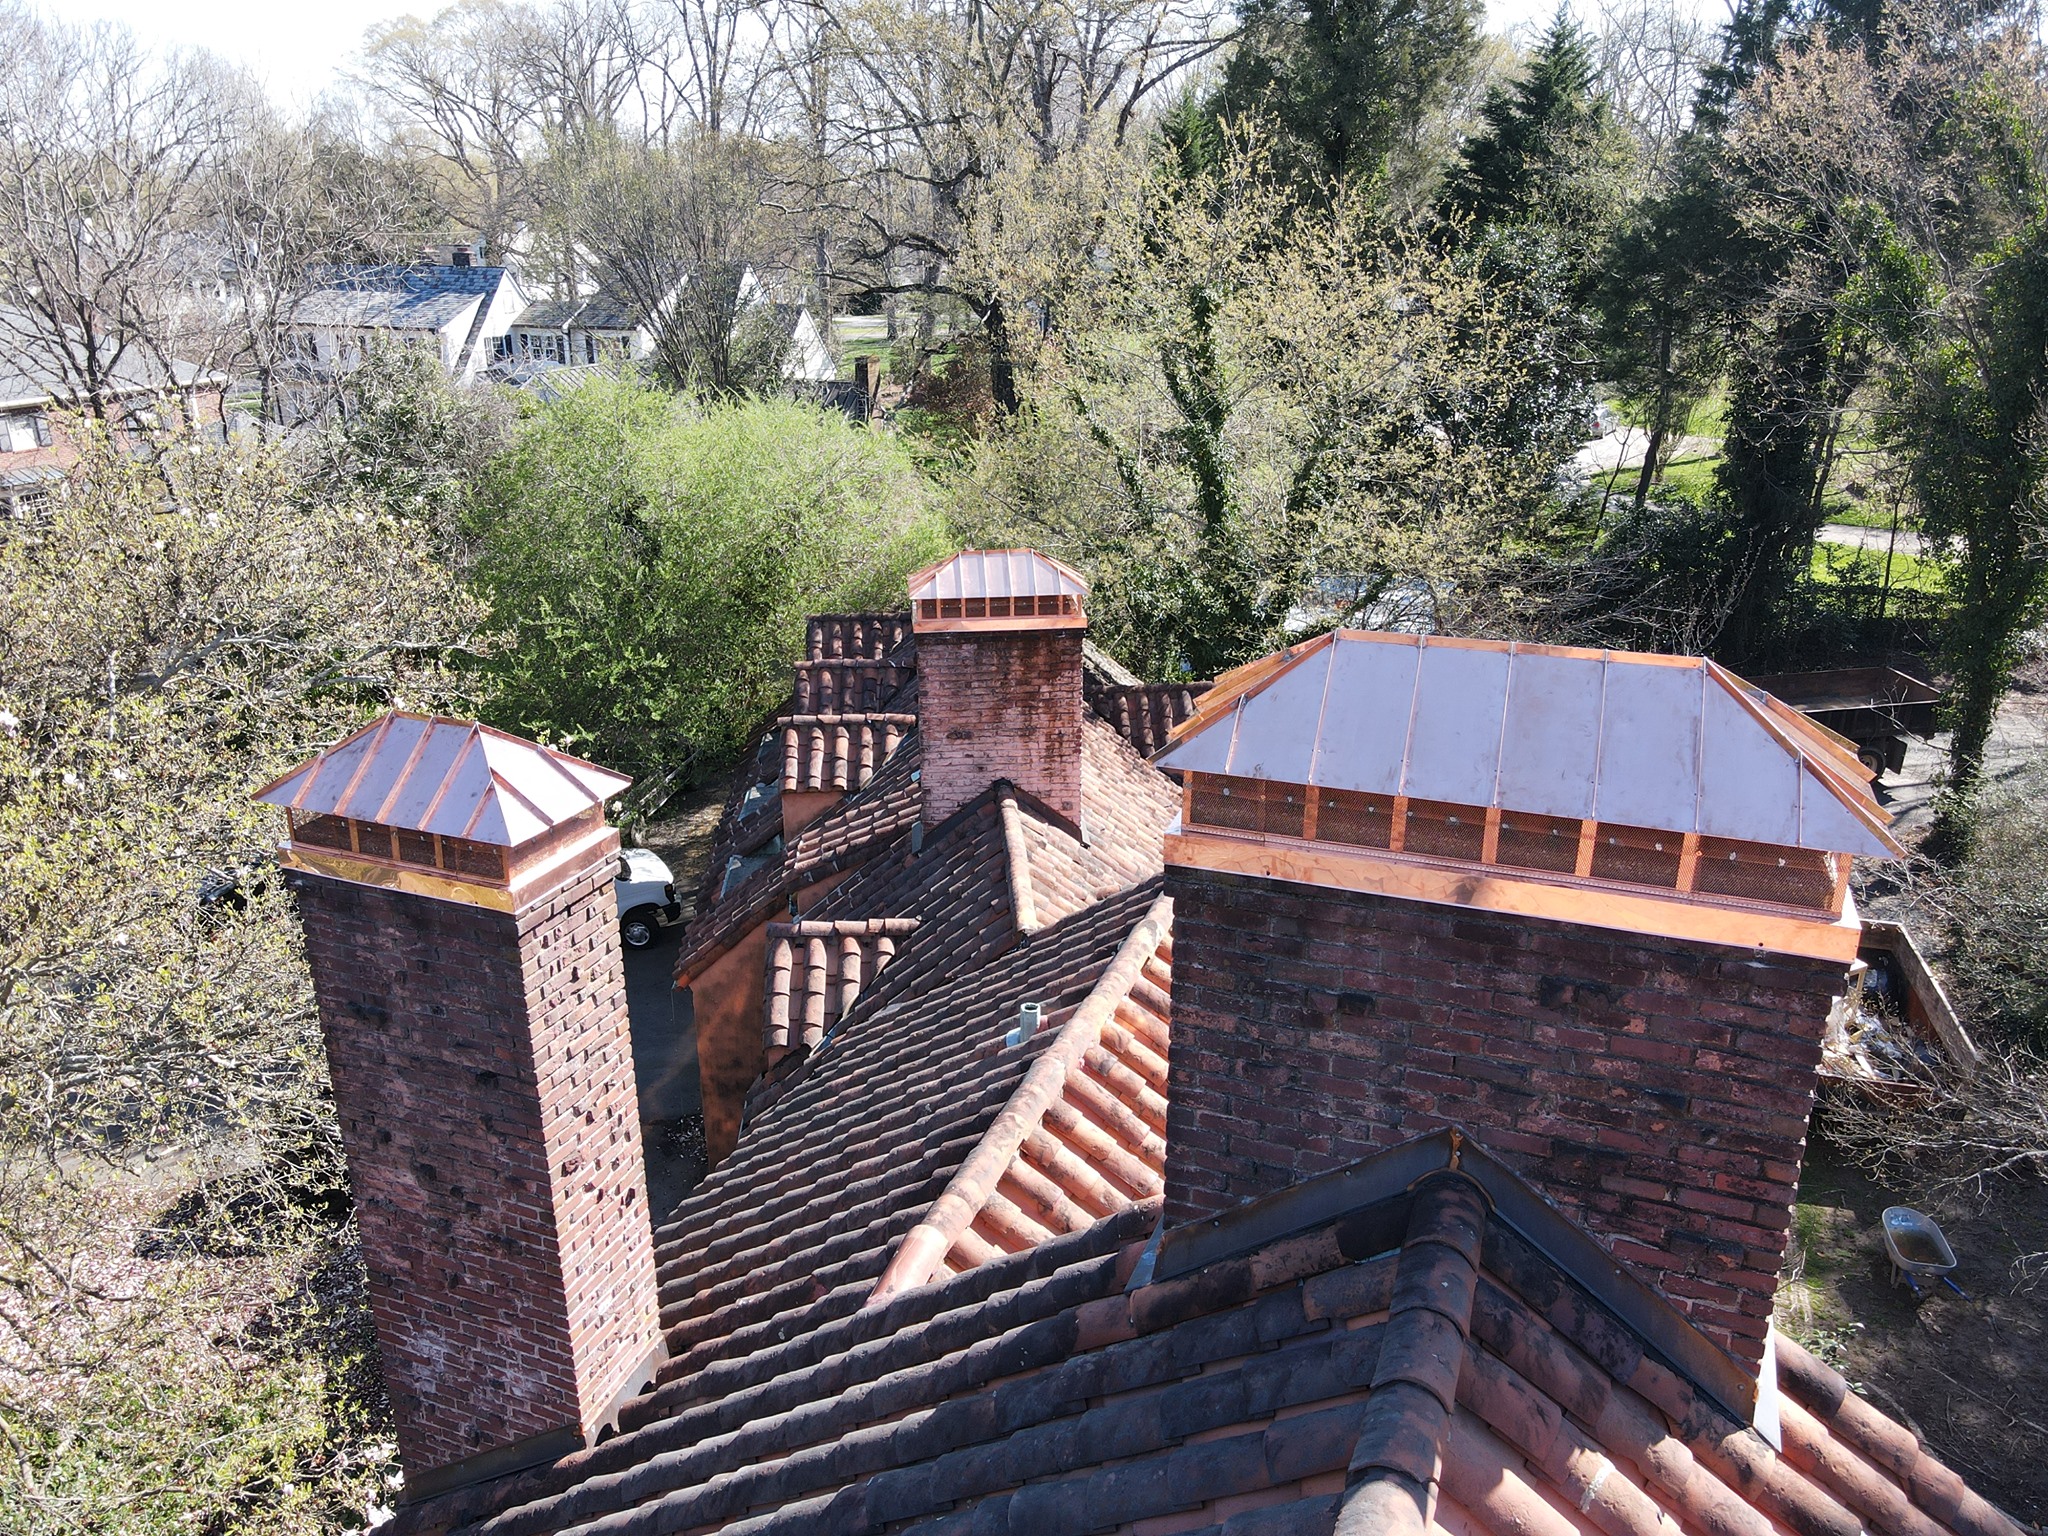 Preferred Roofing, Inc.